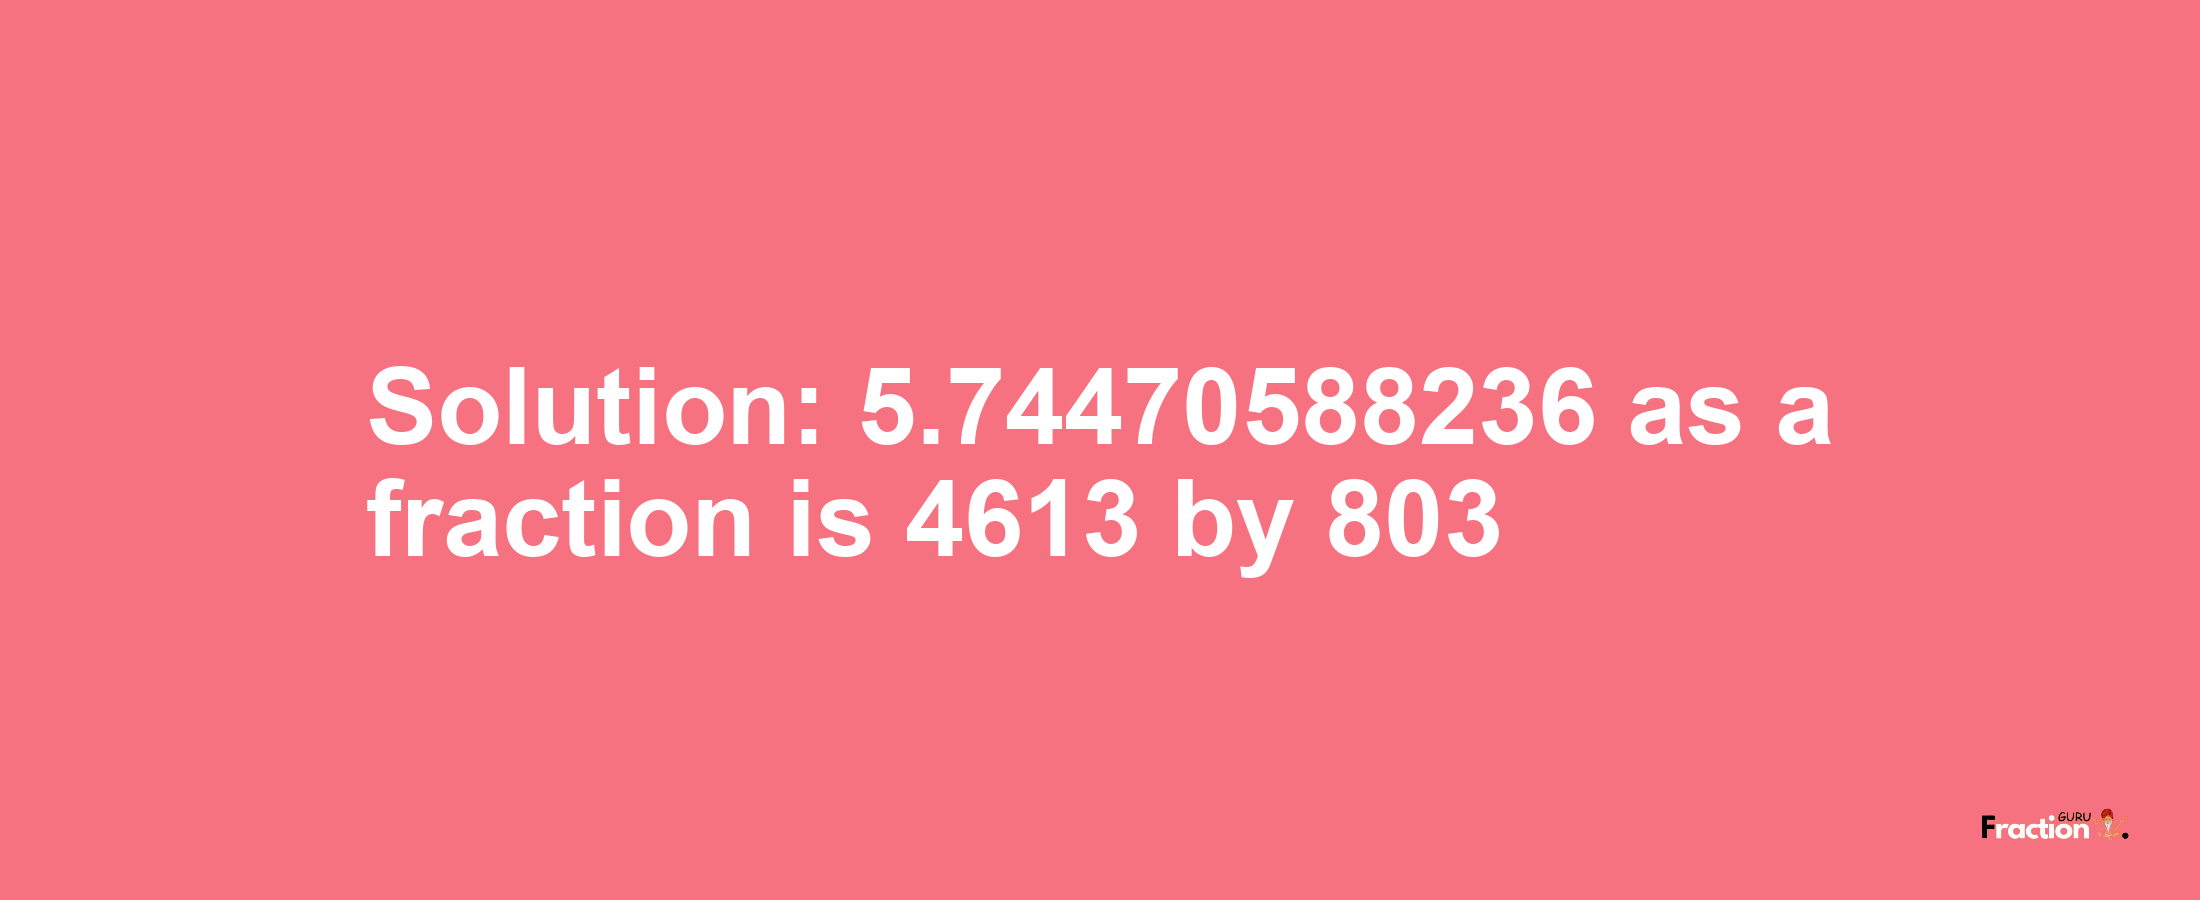 Solution:5.74470588236 as a fraction is 4613/803